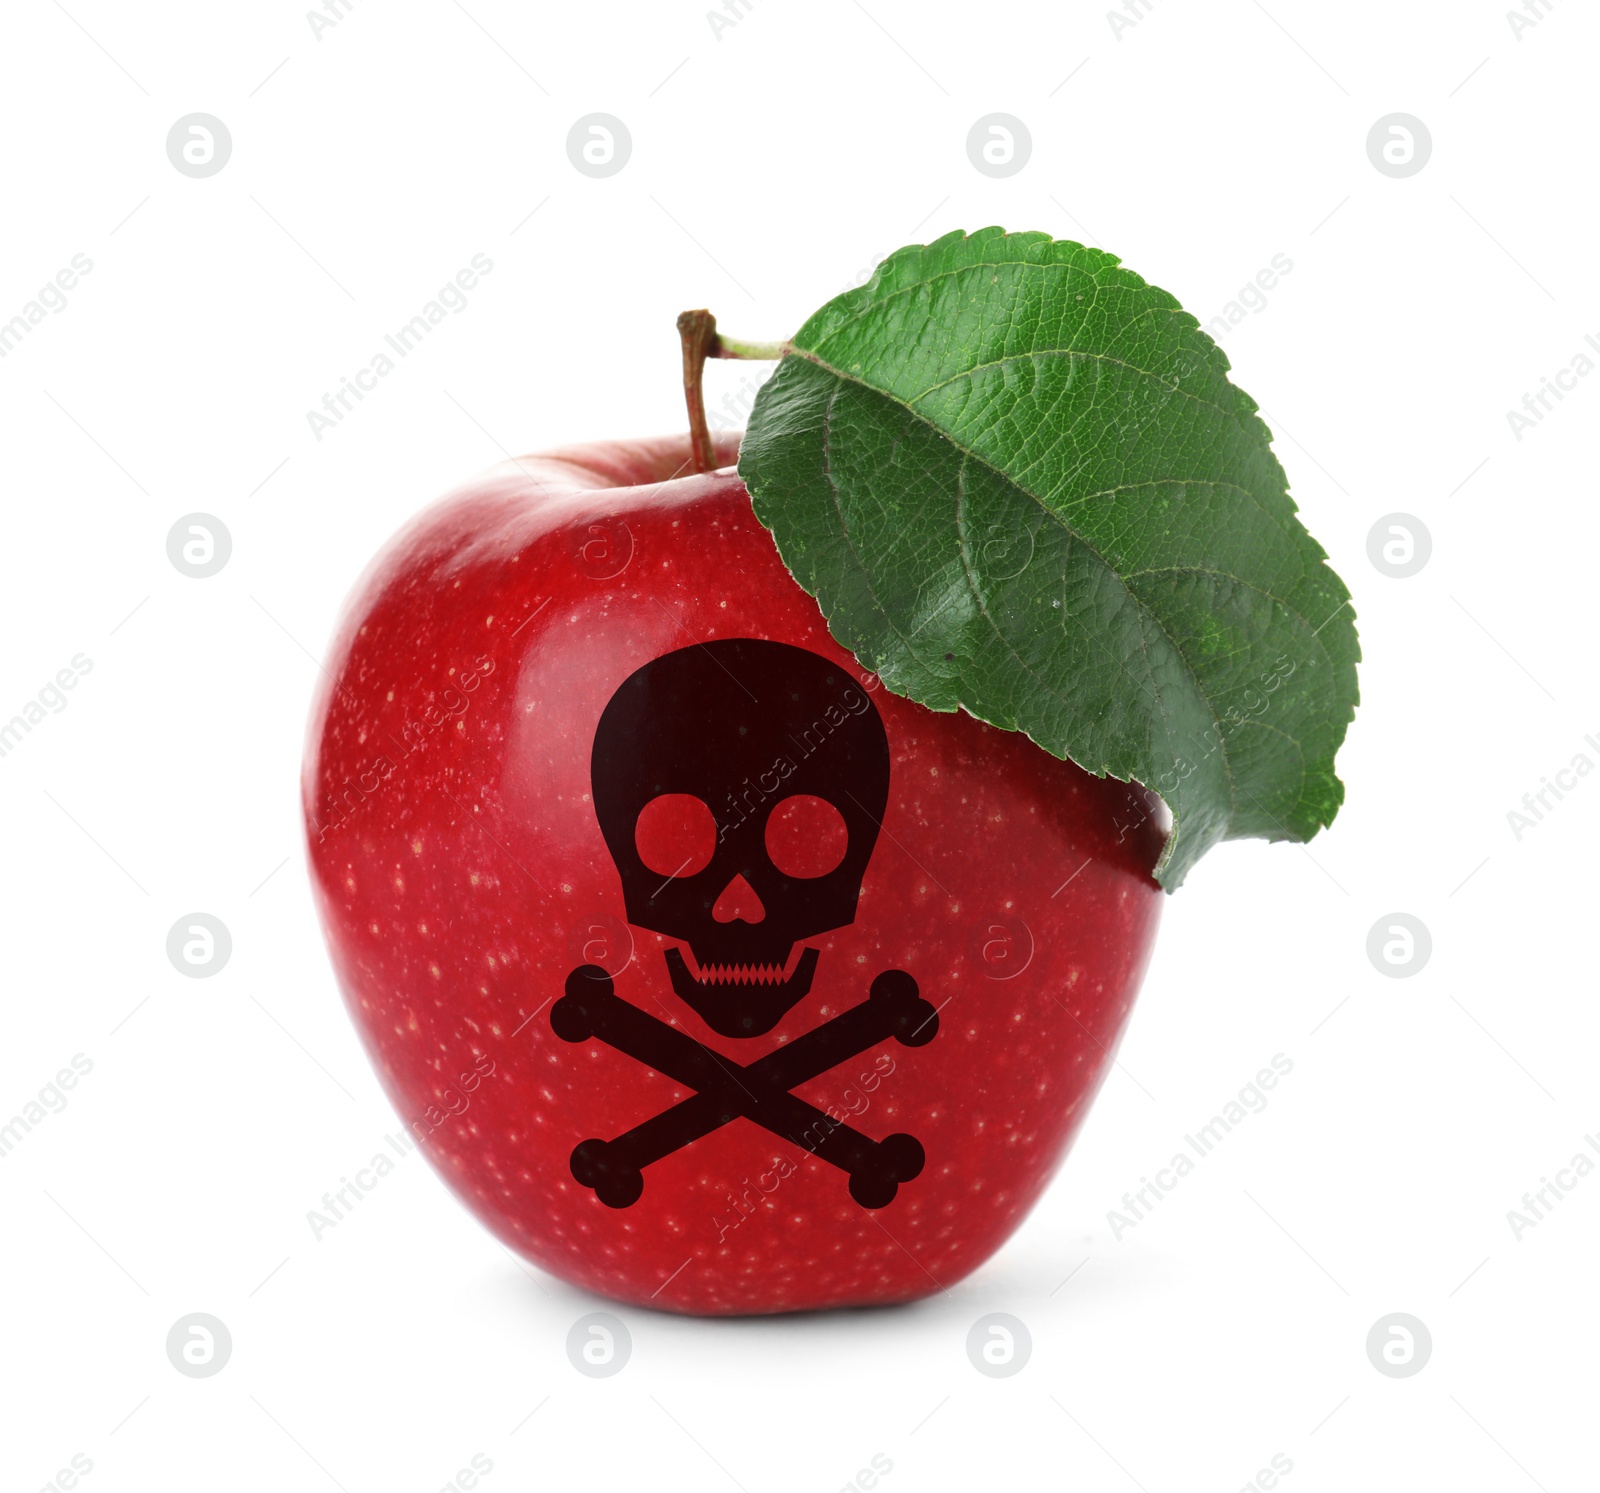 Image of Red poison apple with skull and crossbones image on white background